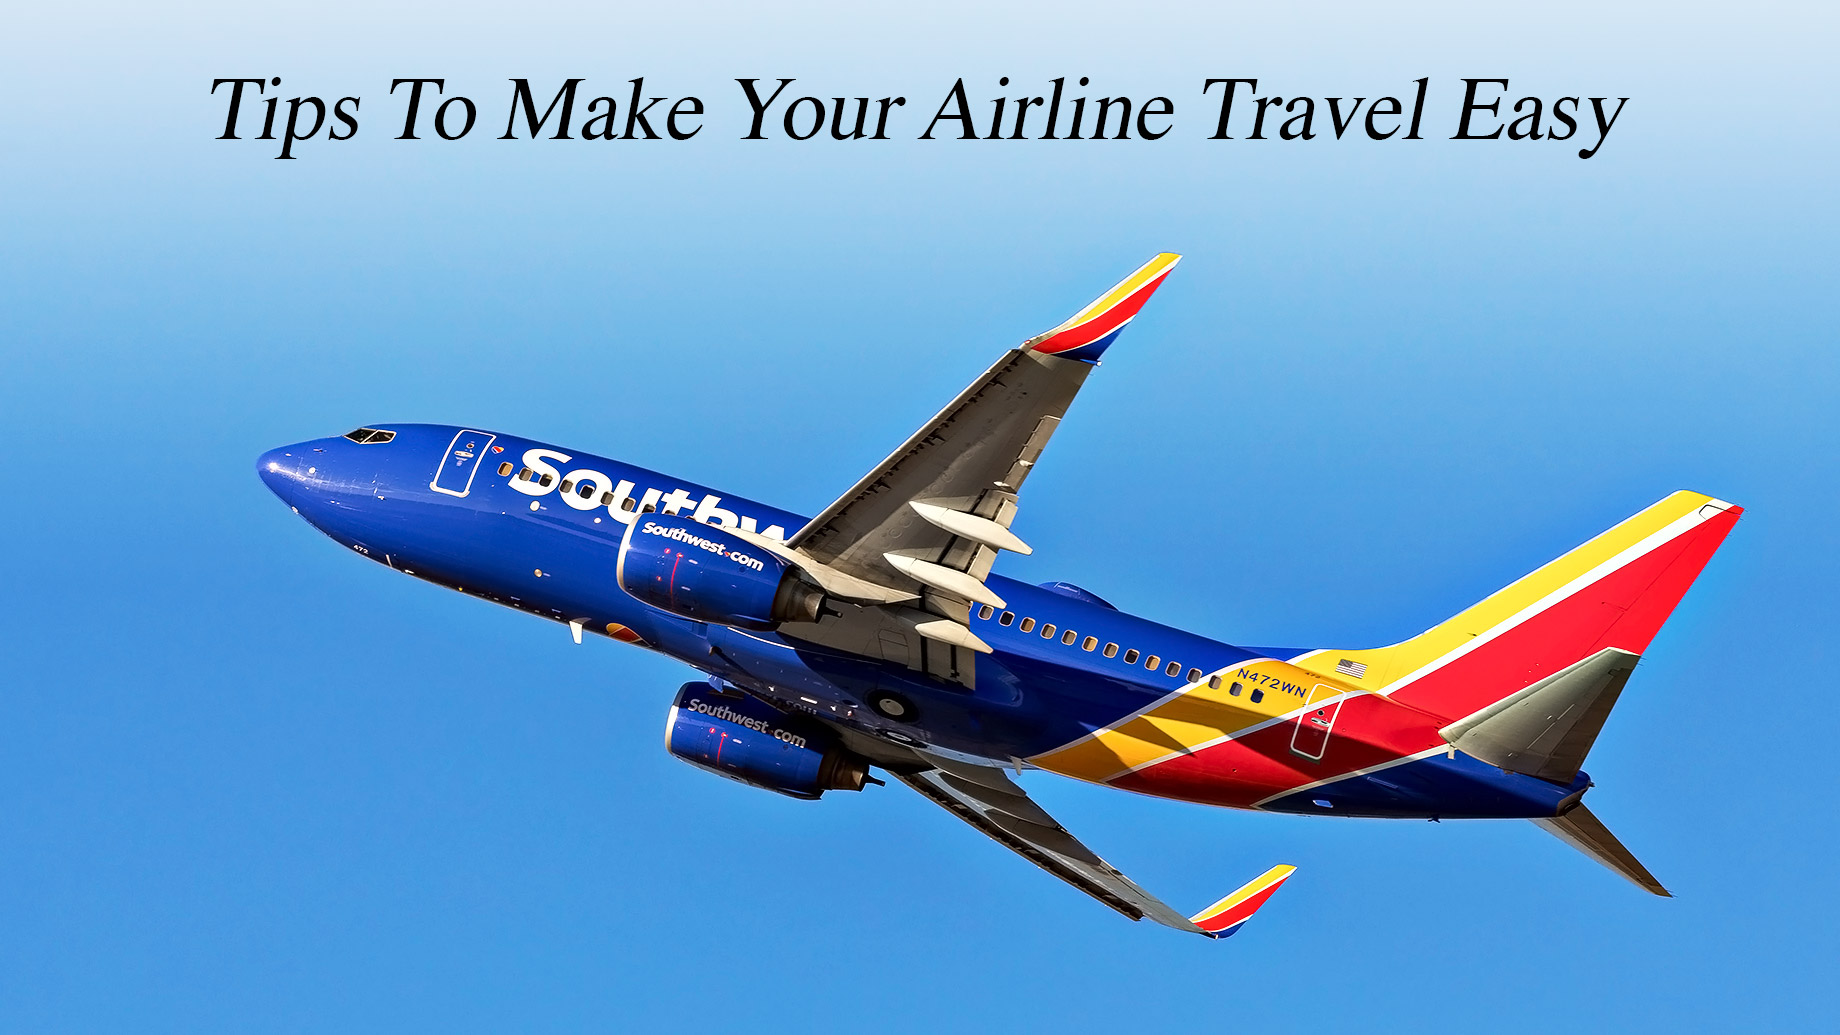 Tips To Make Your Airline Travel Easy